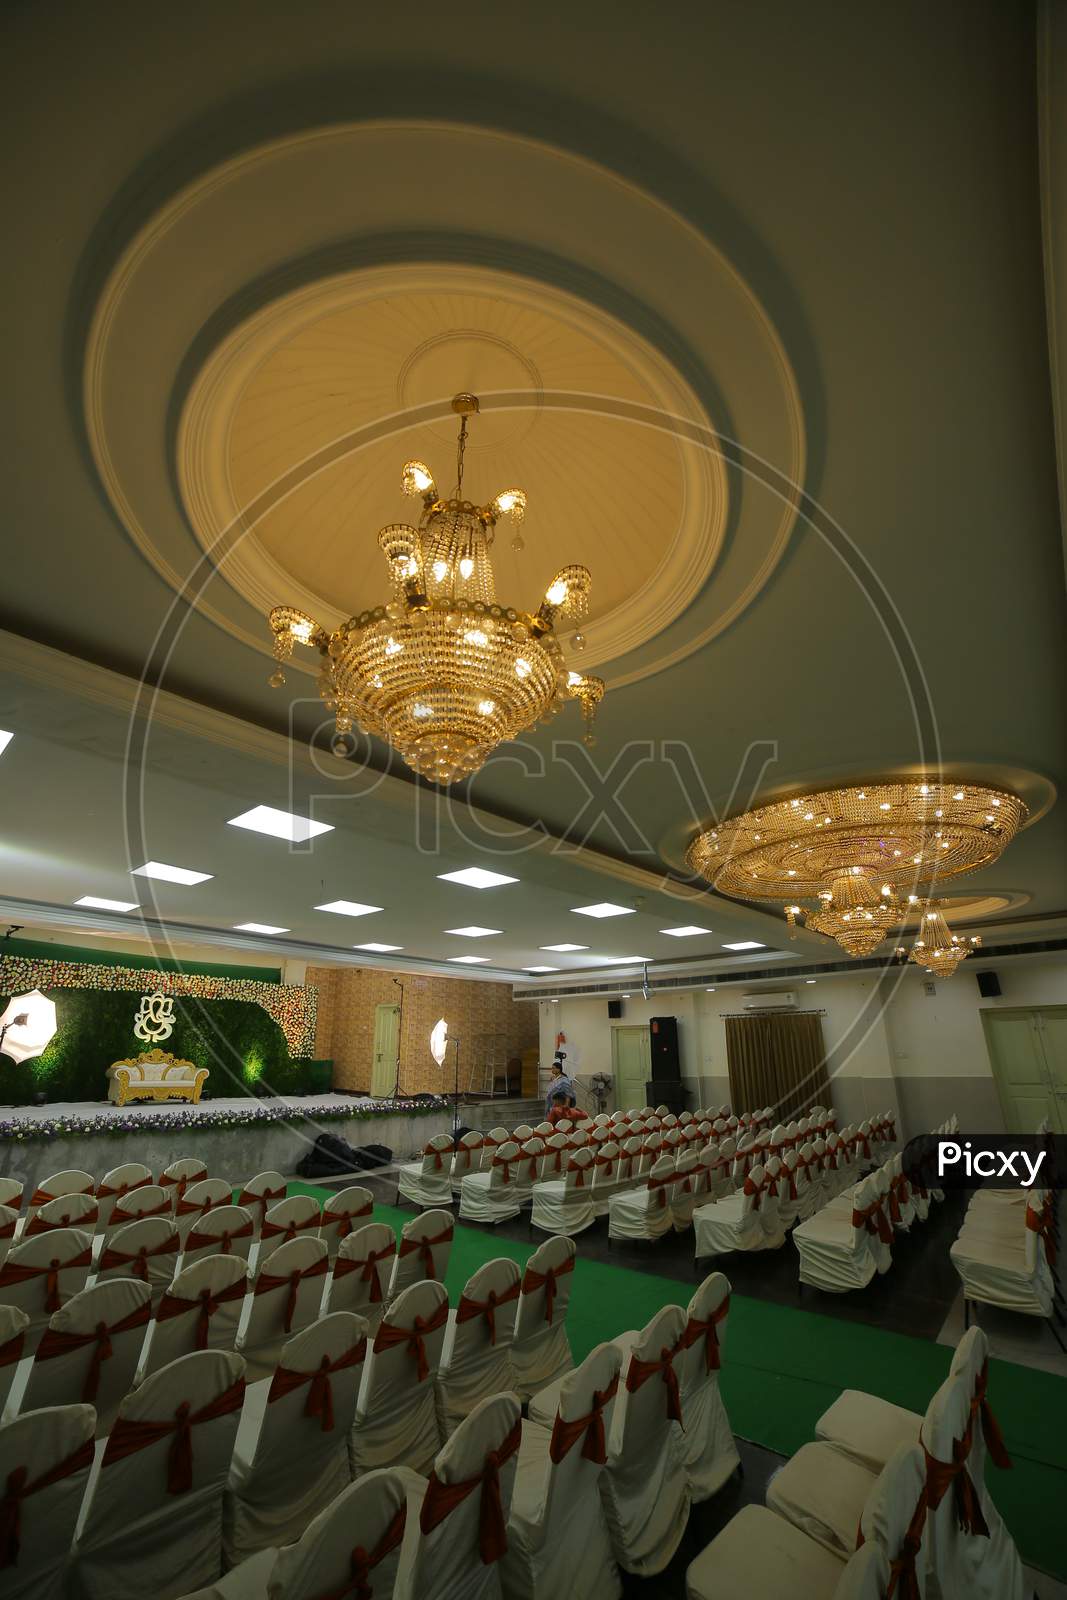 Chandeliers of the ceiling of the auditorium